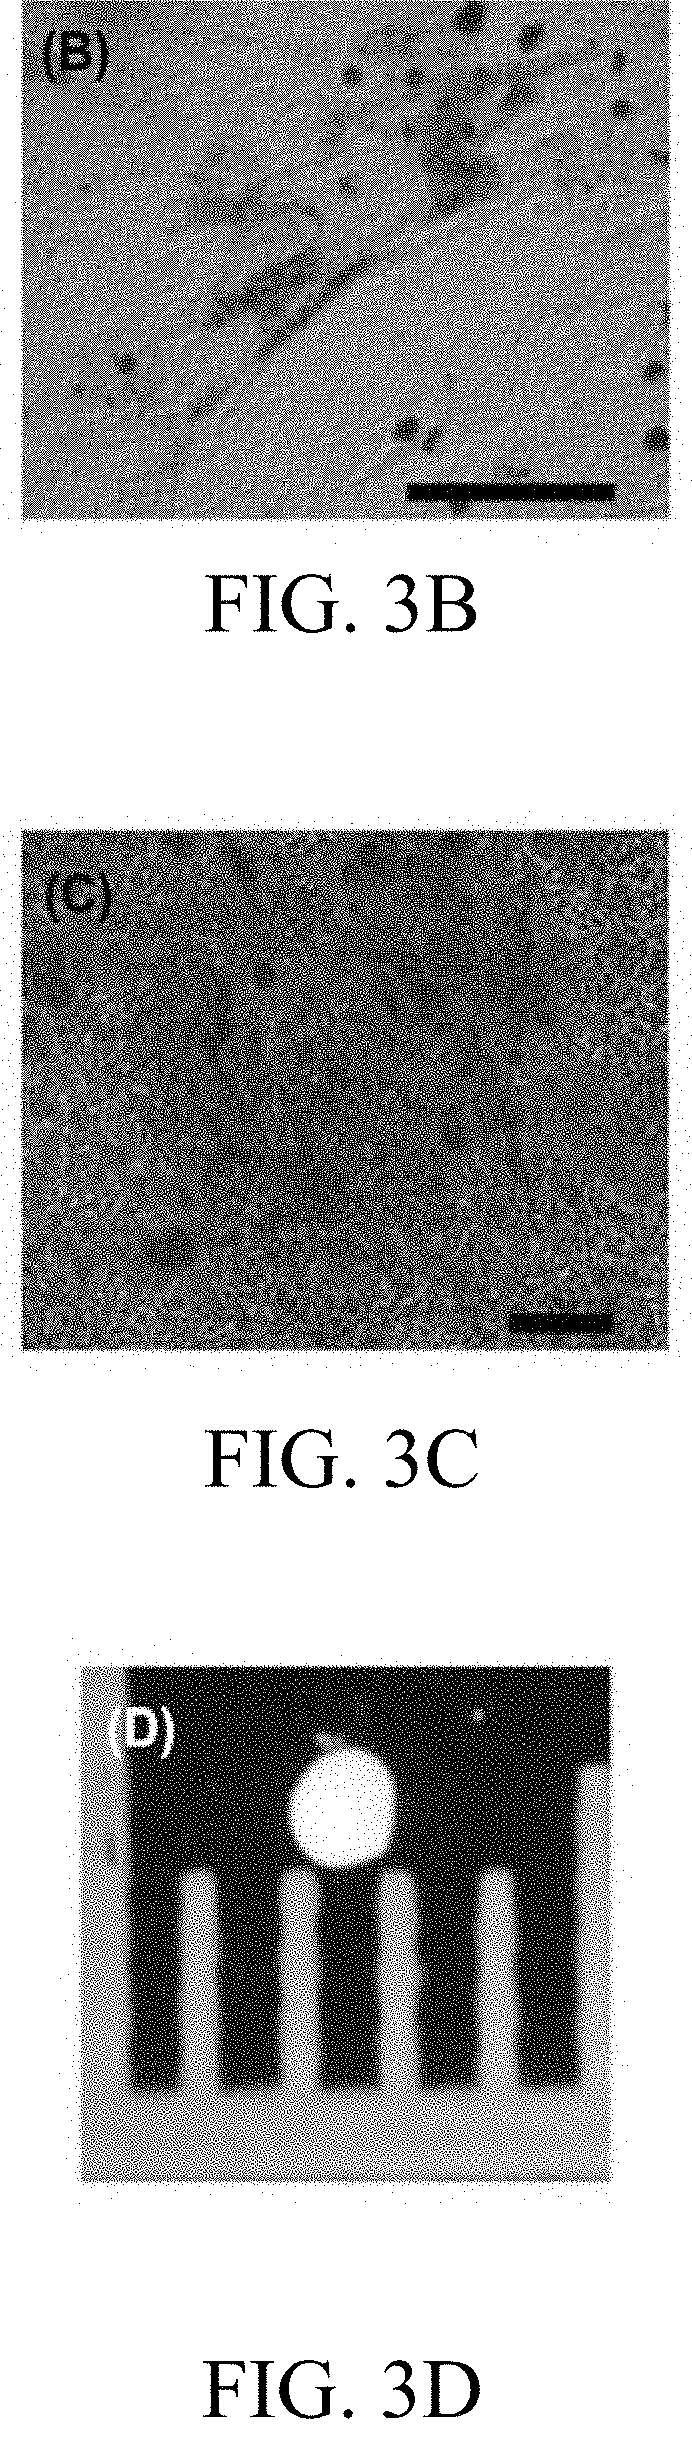 Mesenchymal stem cell derived exosomes and method for preventing or treating a joint disorder by administering a composition comprising the same